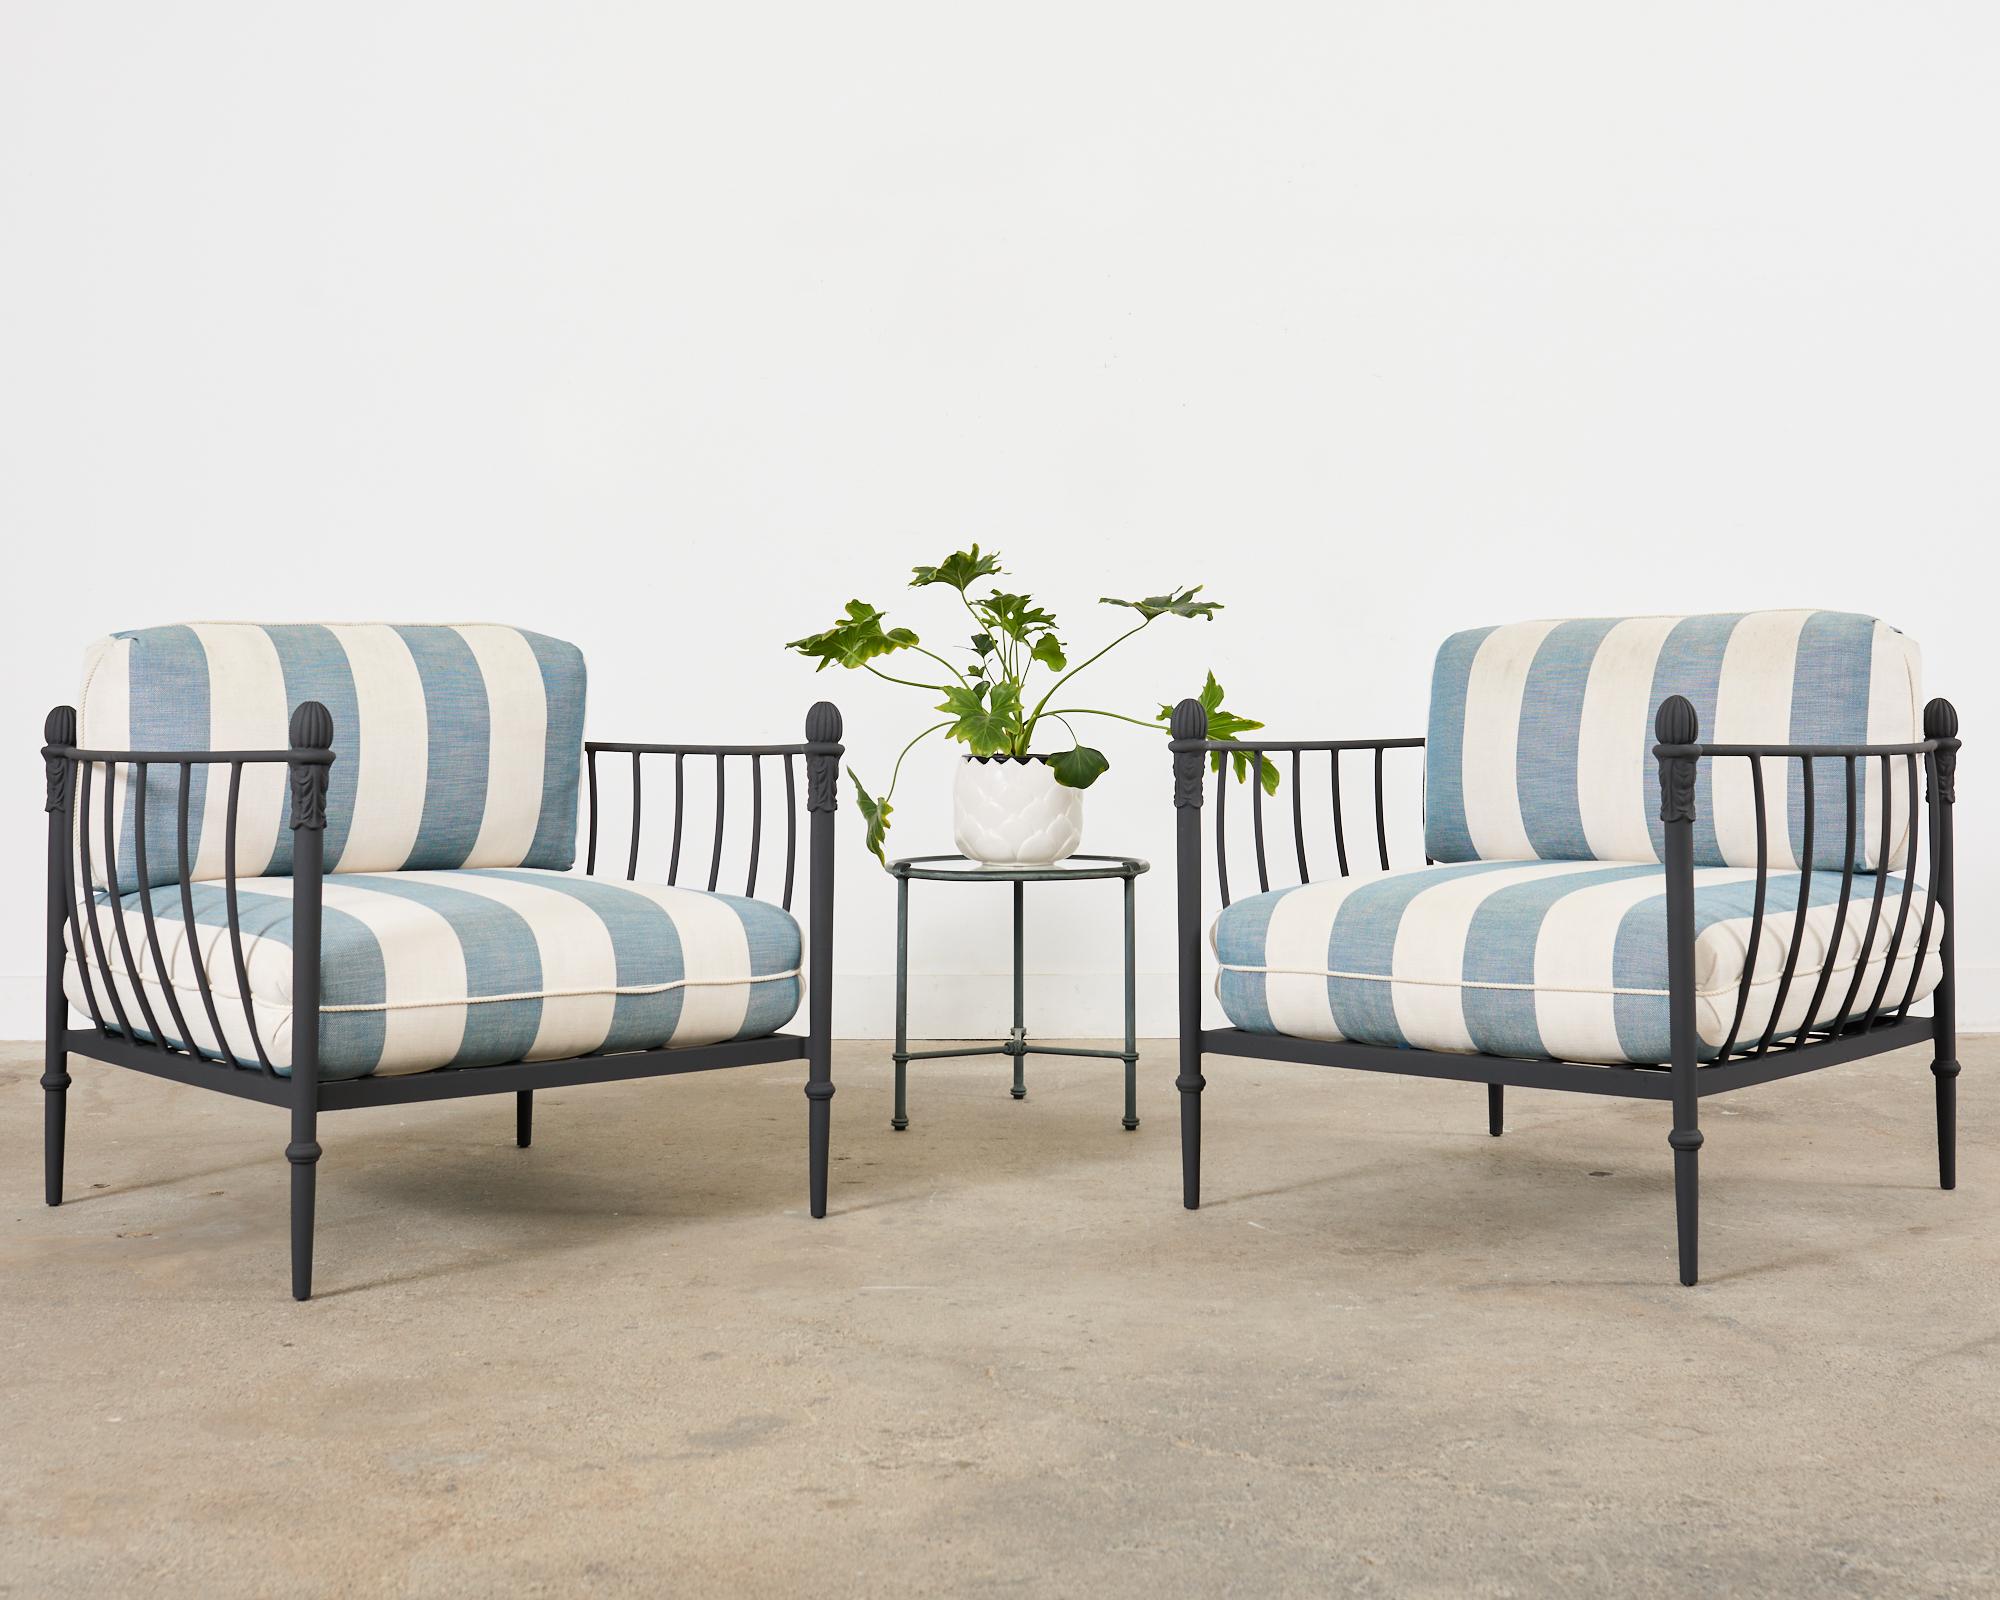 Iconic pair of patio and garden cast aluminum chairs and ottoman made in the style and manner of Michael Taylor by a foundry in Los Angeles, CA. The Montecito chairs feature an oversized frame with large fitted cushions in a blue and white striped